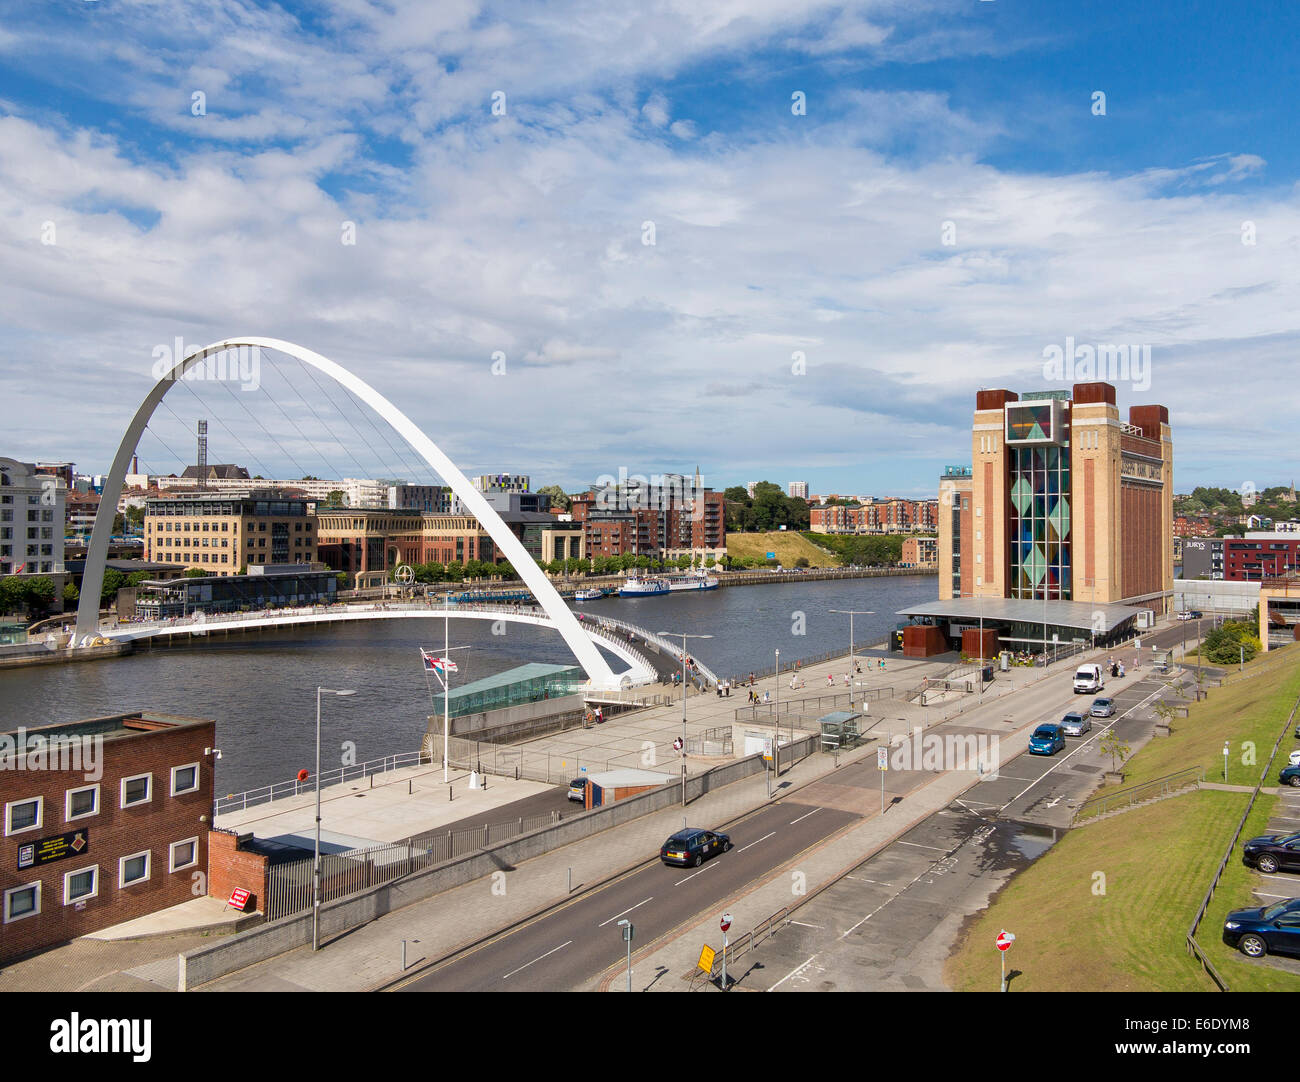 Baltic Centre for Contemporary Art, and Millennium Bridge crossing the River Tyne between Newcastle and Gateshead. Stock Photo